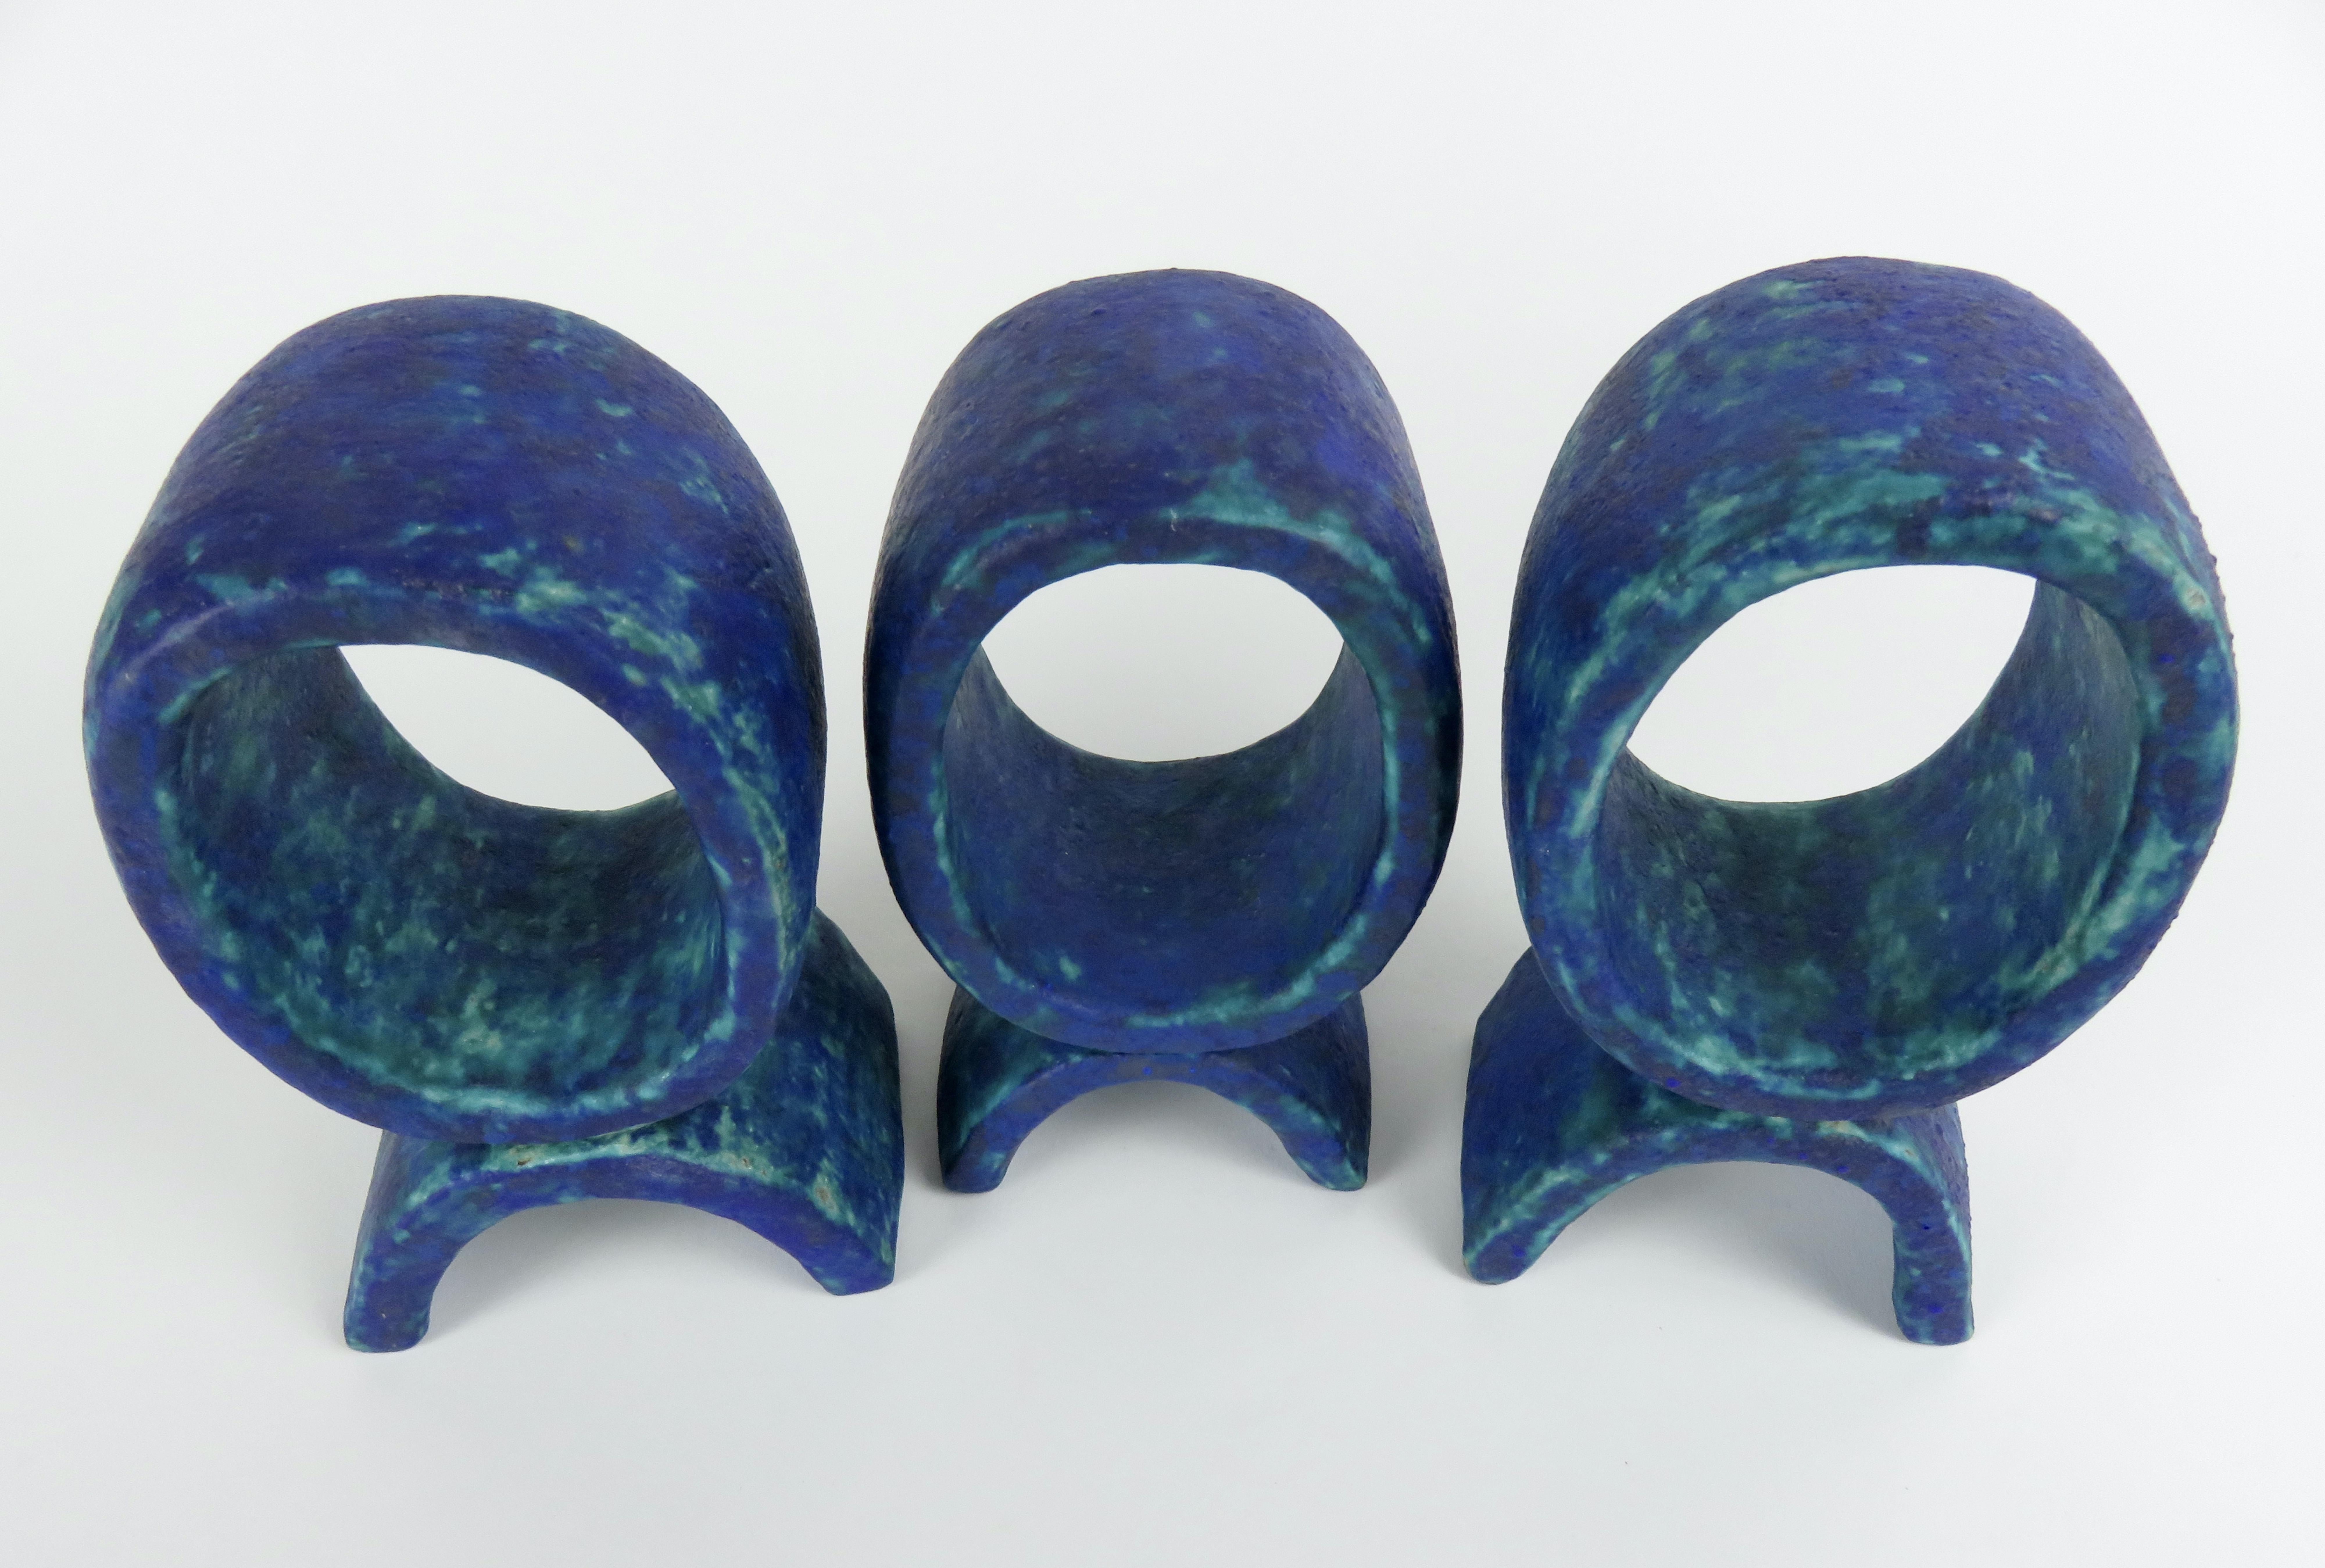 American Mottled Turquoise and Deep Blue, 3 Ceramic Totems, Single Rings on Curved Legs For Sale